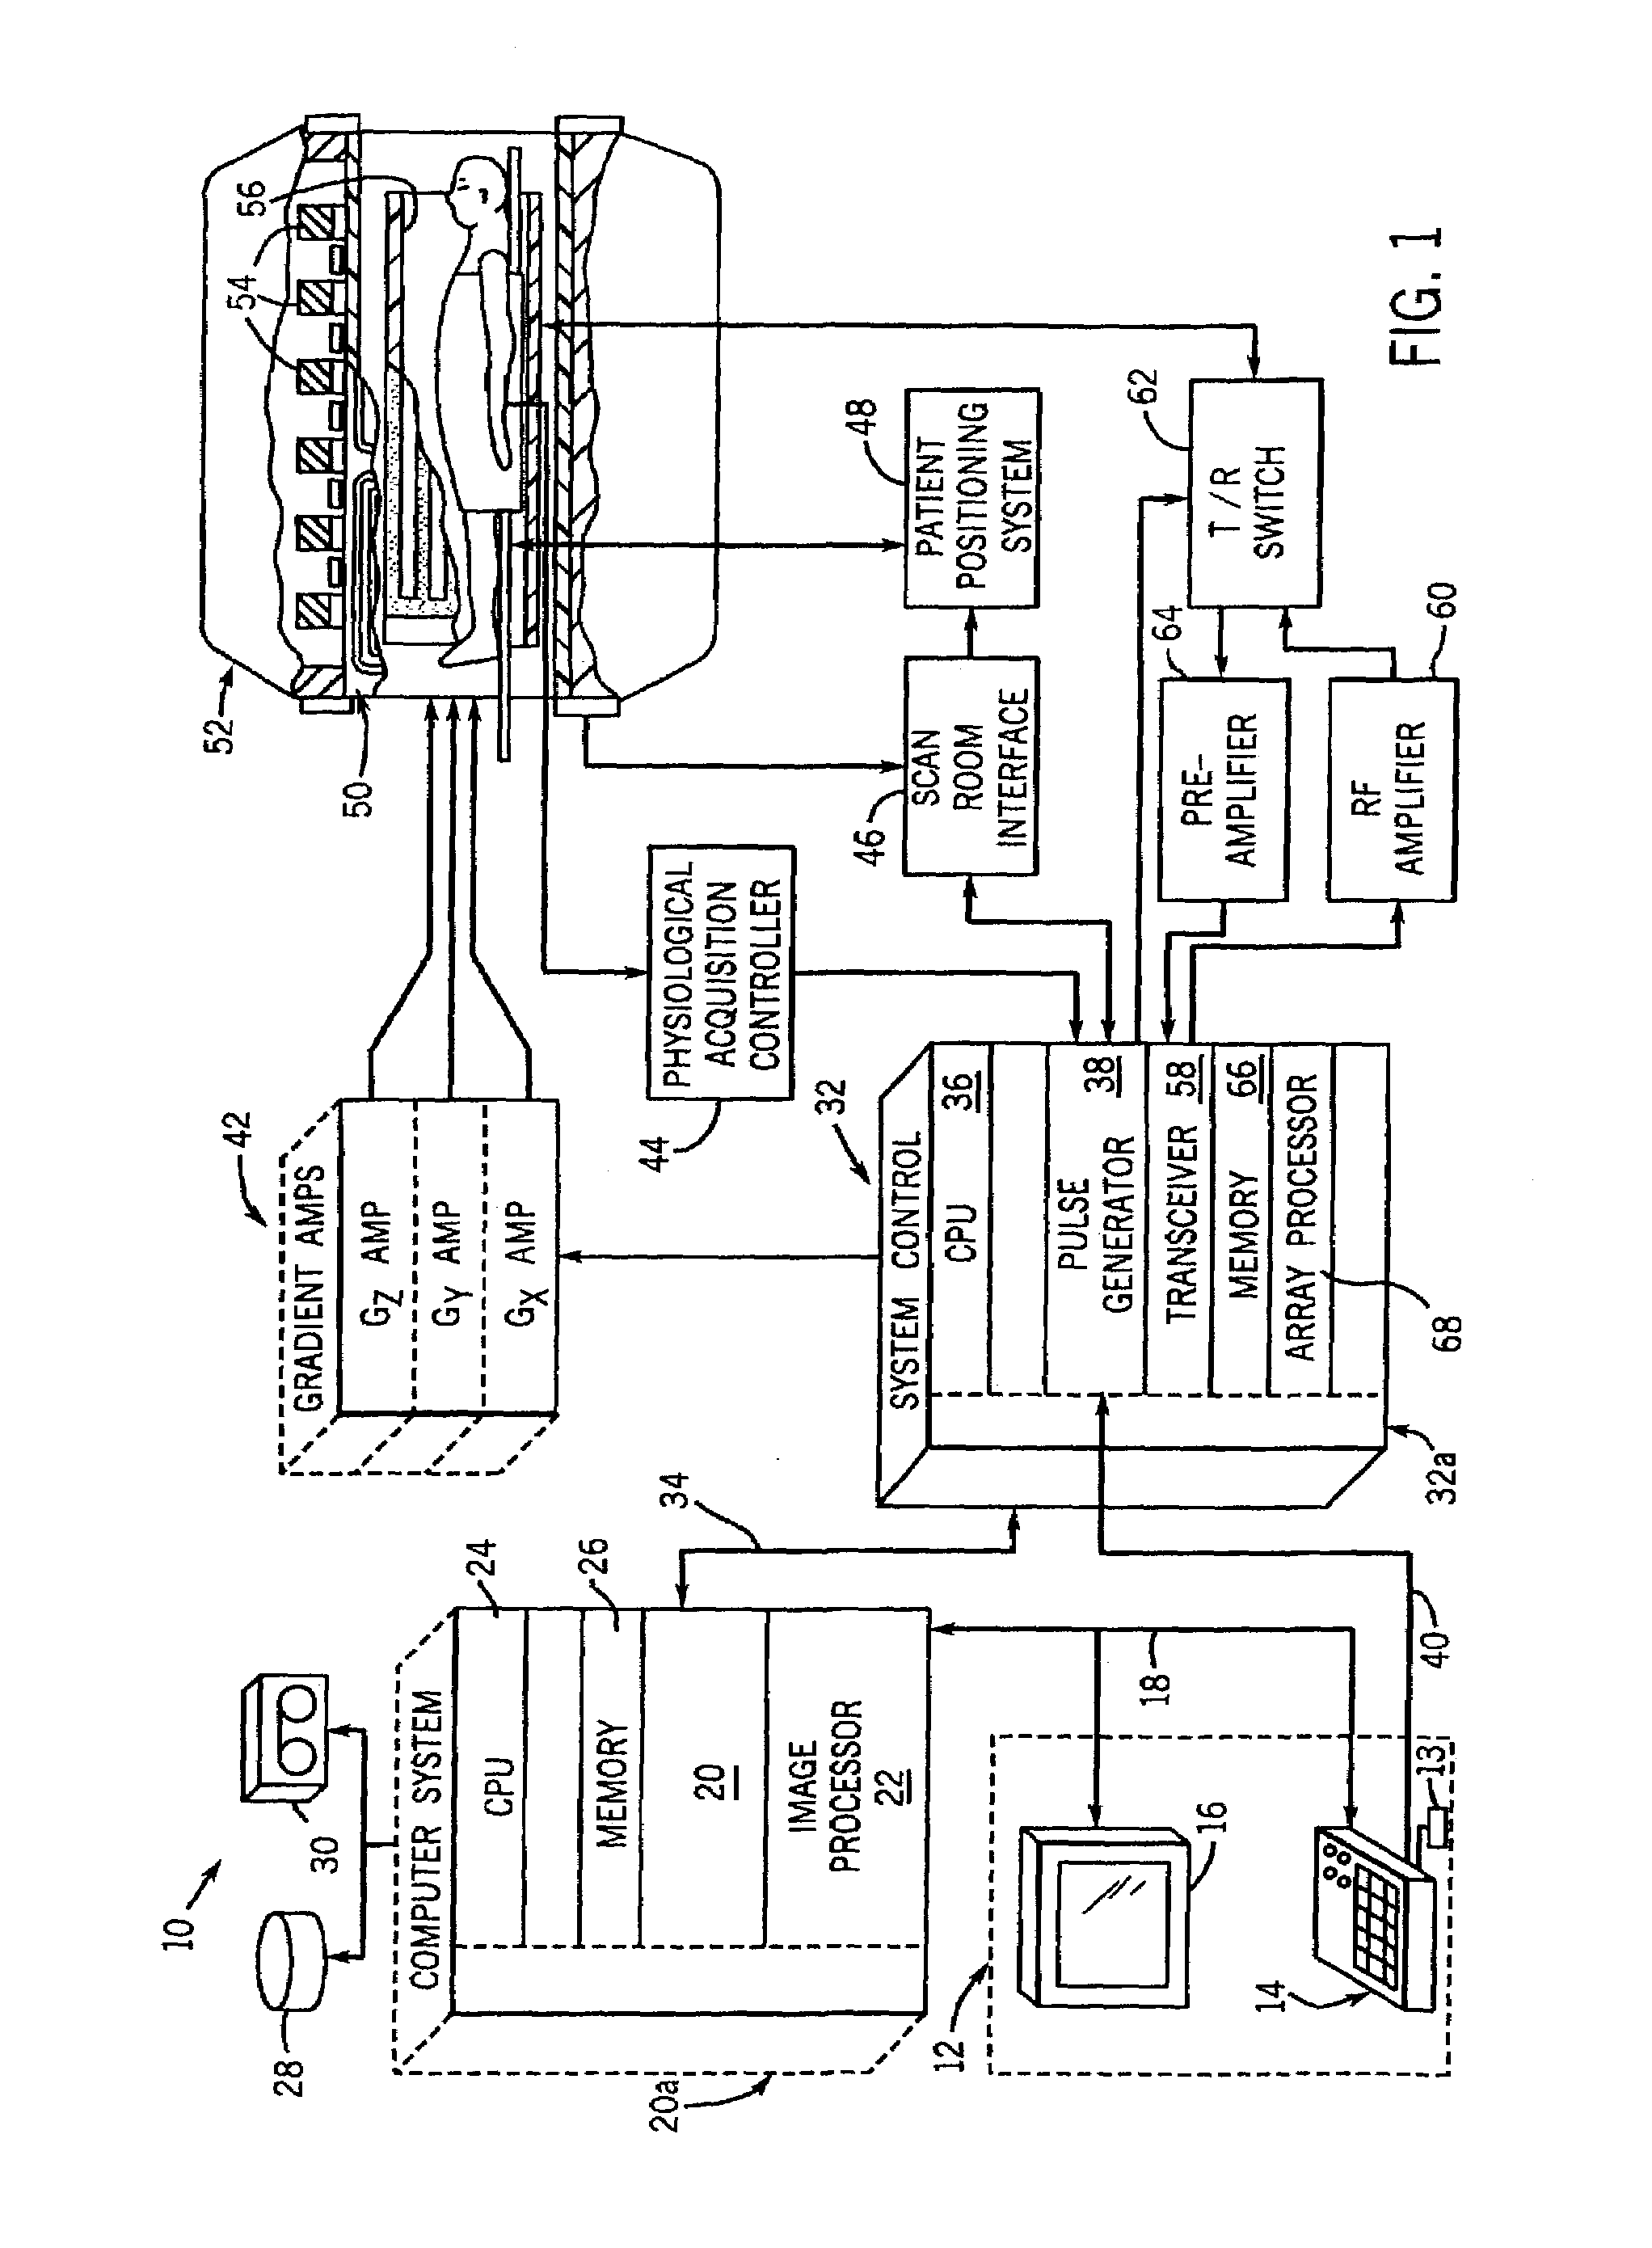 Method and apparatus for improved metabolite signal separation in MR spectroscopy